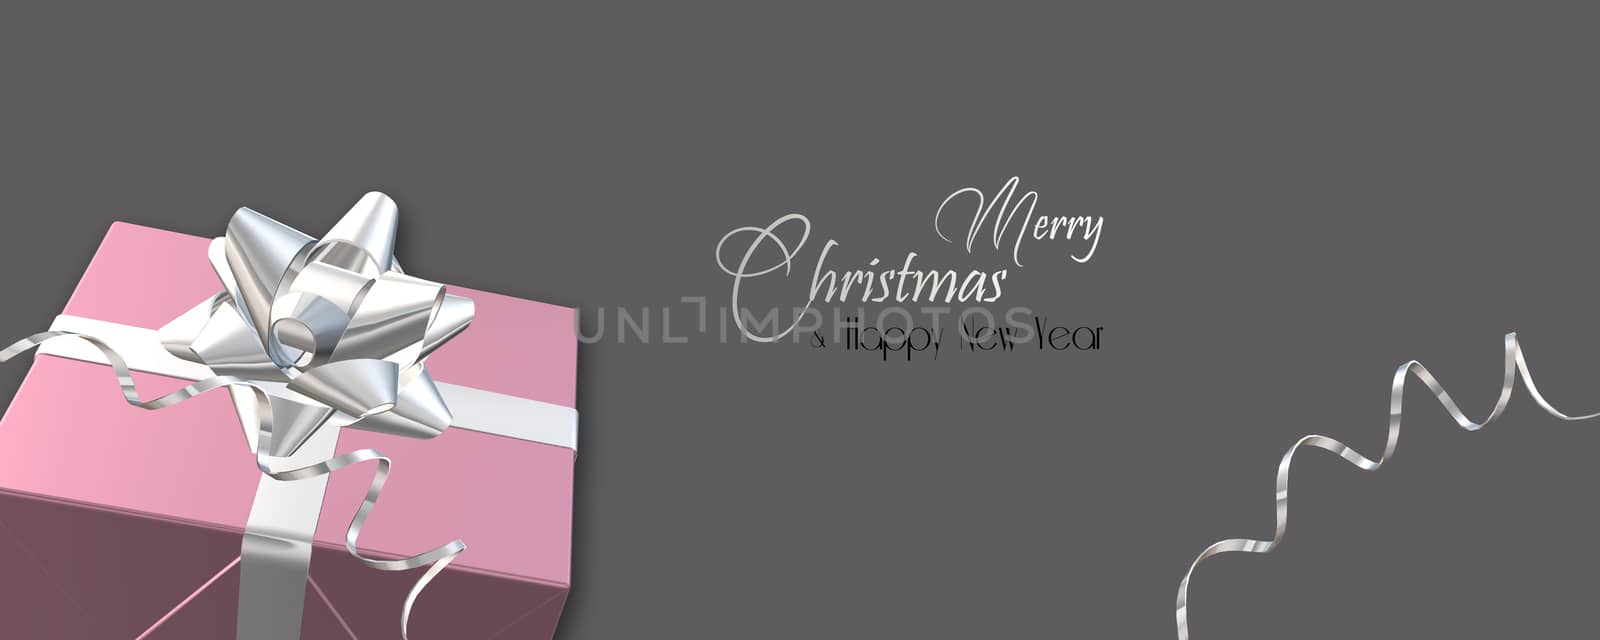 Christmas luxury design with gift box by NelliPolk